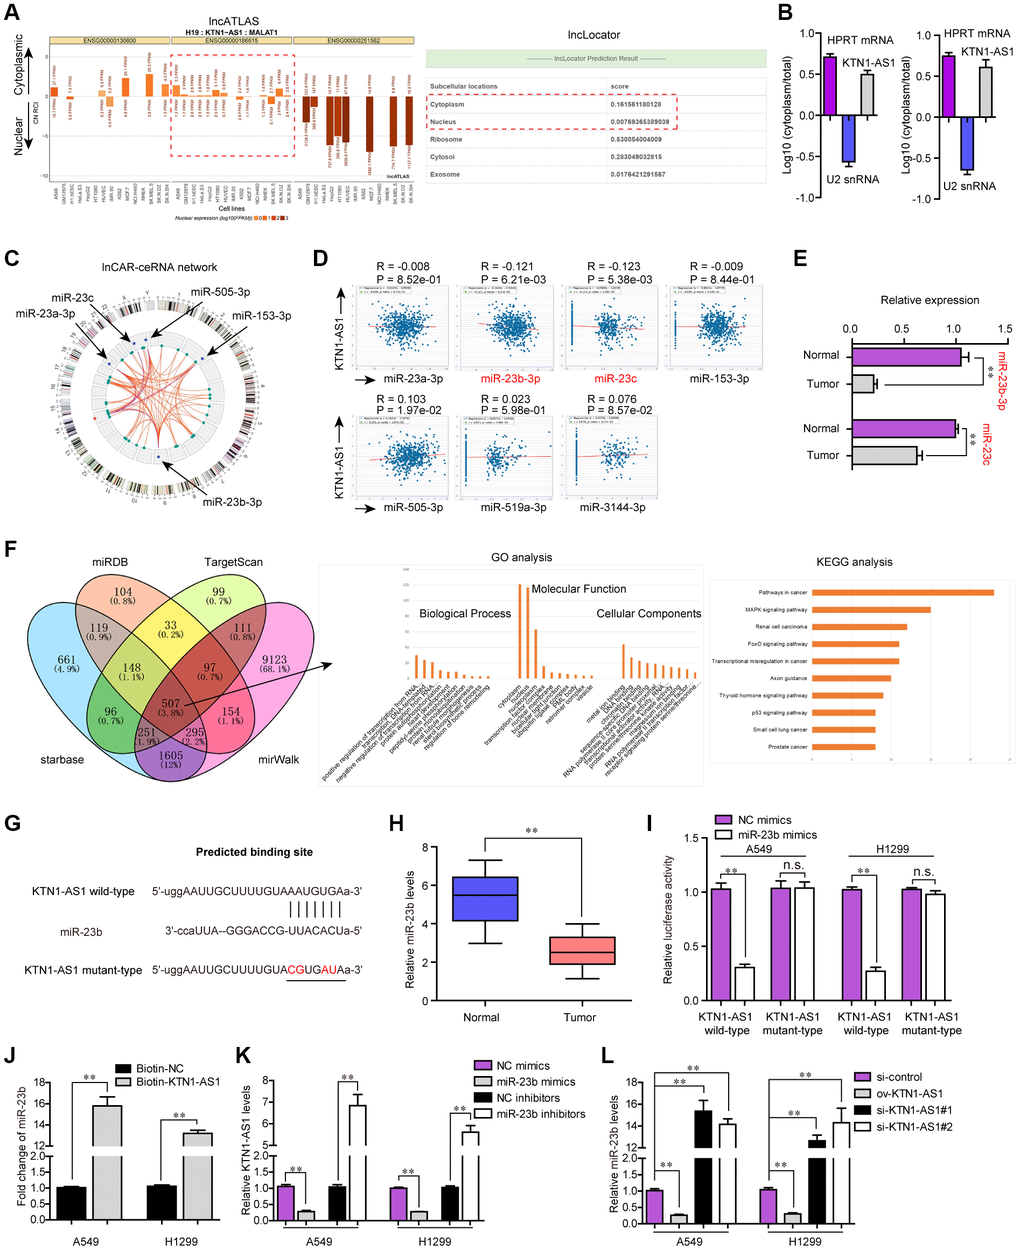 miR-23b was directly targeted by KTN1-AS1. (A) The subcellular localization of KTN1-AS1 was predicted by lncATLAS and lncLocator. (B) Subcellular fractionation assays. (C) The ceRNA network of KTN1-AS1 was analyzed by lnCAR. (D) starBase program analyzed the expressing correlation between KTN1-AS1 and miRNAs. (E) qPCR analysis detected the expression of miR-23b and miR-23c. (F) The intersection of the results from miRDB, TargetScan, starBase and miRWalk prediction. The commonly predicting genes were also used fo GO and KEGG analysis. (G) The predicting binding site between KTN1-AS1 and miR-23b. (H) qPCR assessed the miR-23b levels in 127 NSCLC tissues. (I) Relative luciferase activity detection. (J) RNA-pull down. (K, L) qPCR analysis detected the levels of KTN1-AS1 and miR-23b, respectively. * P 